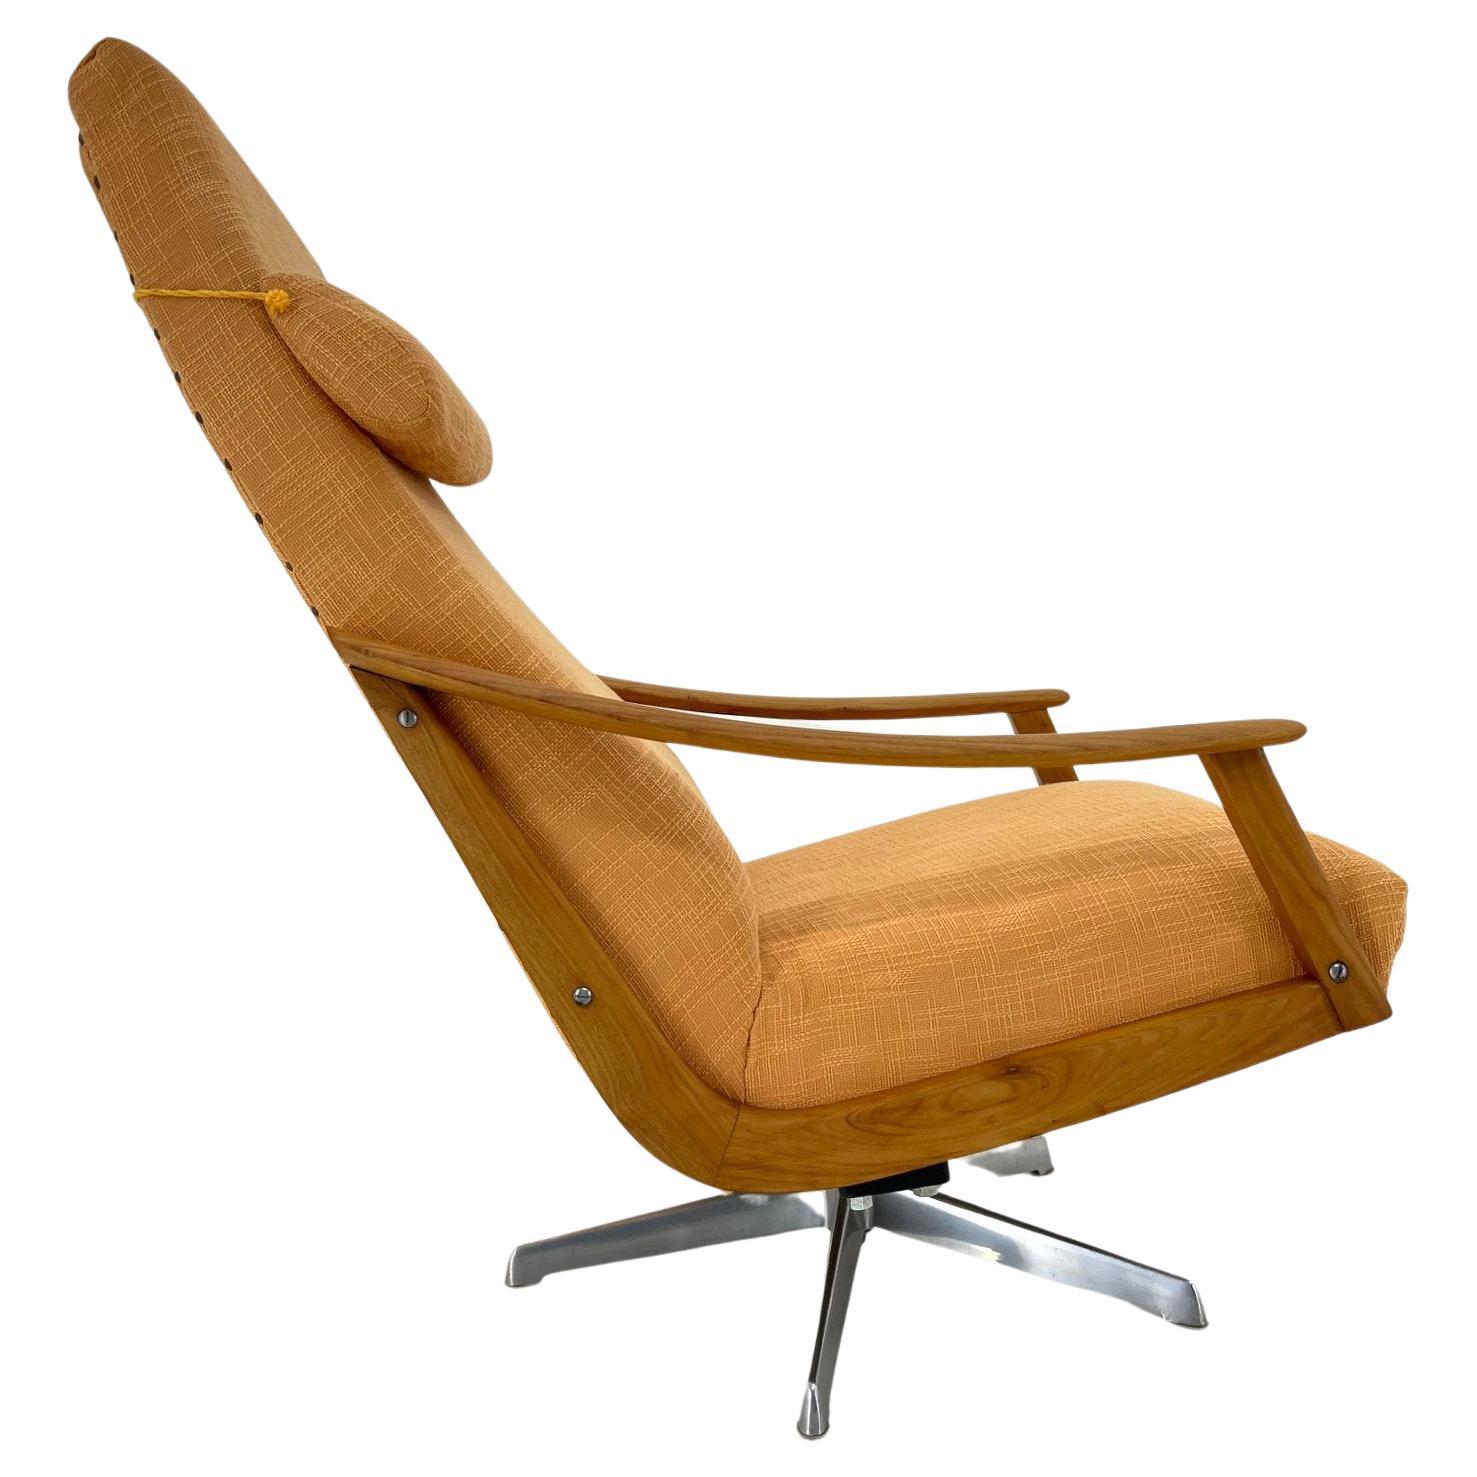 Rare Armchair by Adolf Wrenger, Germany, 1950's